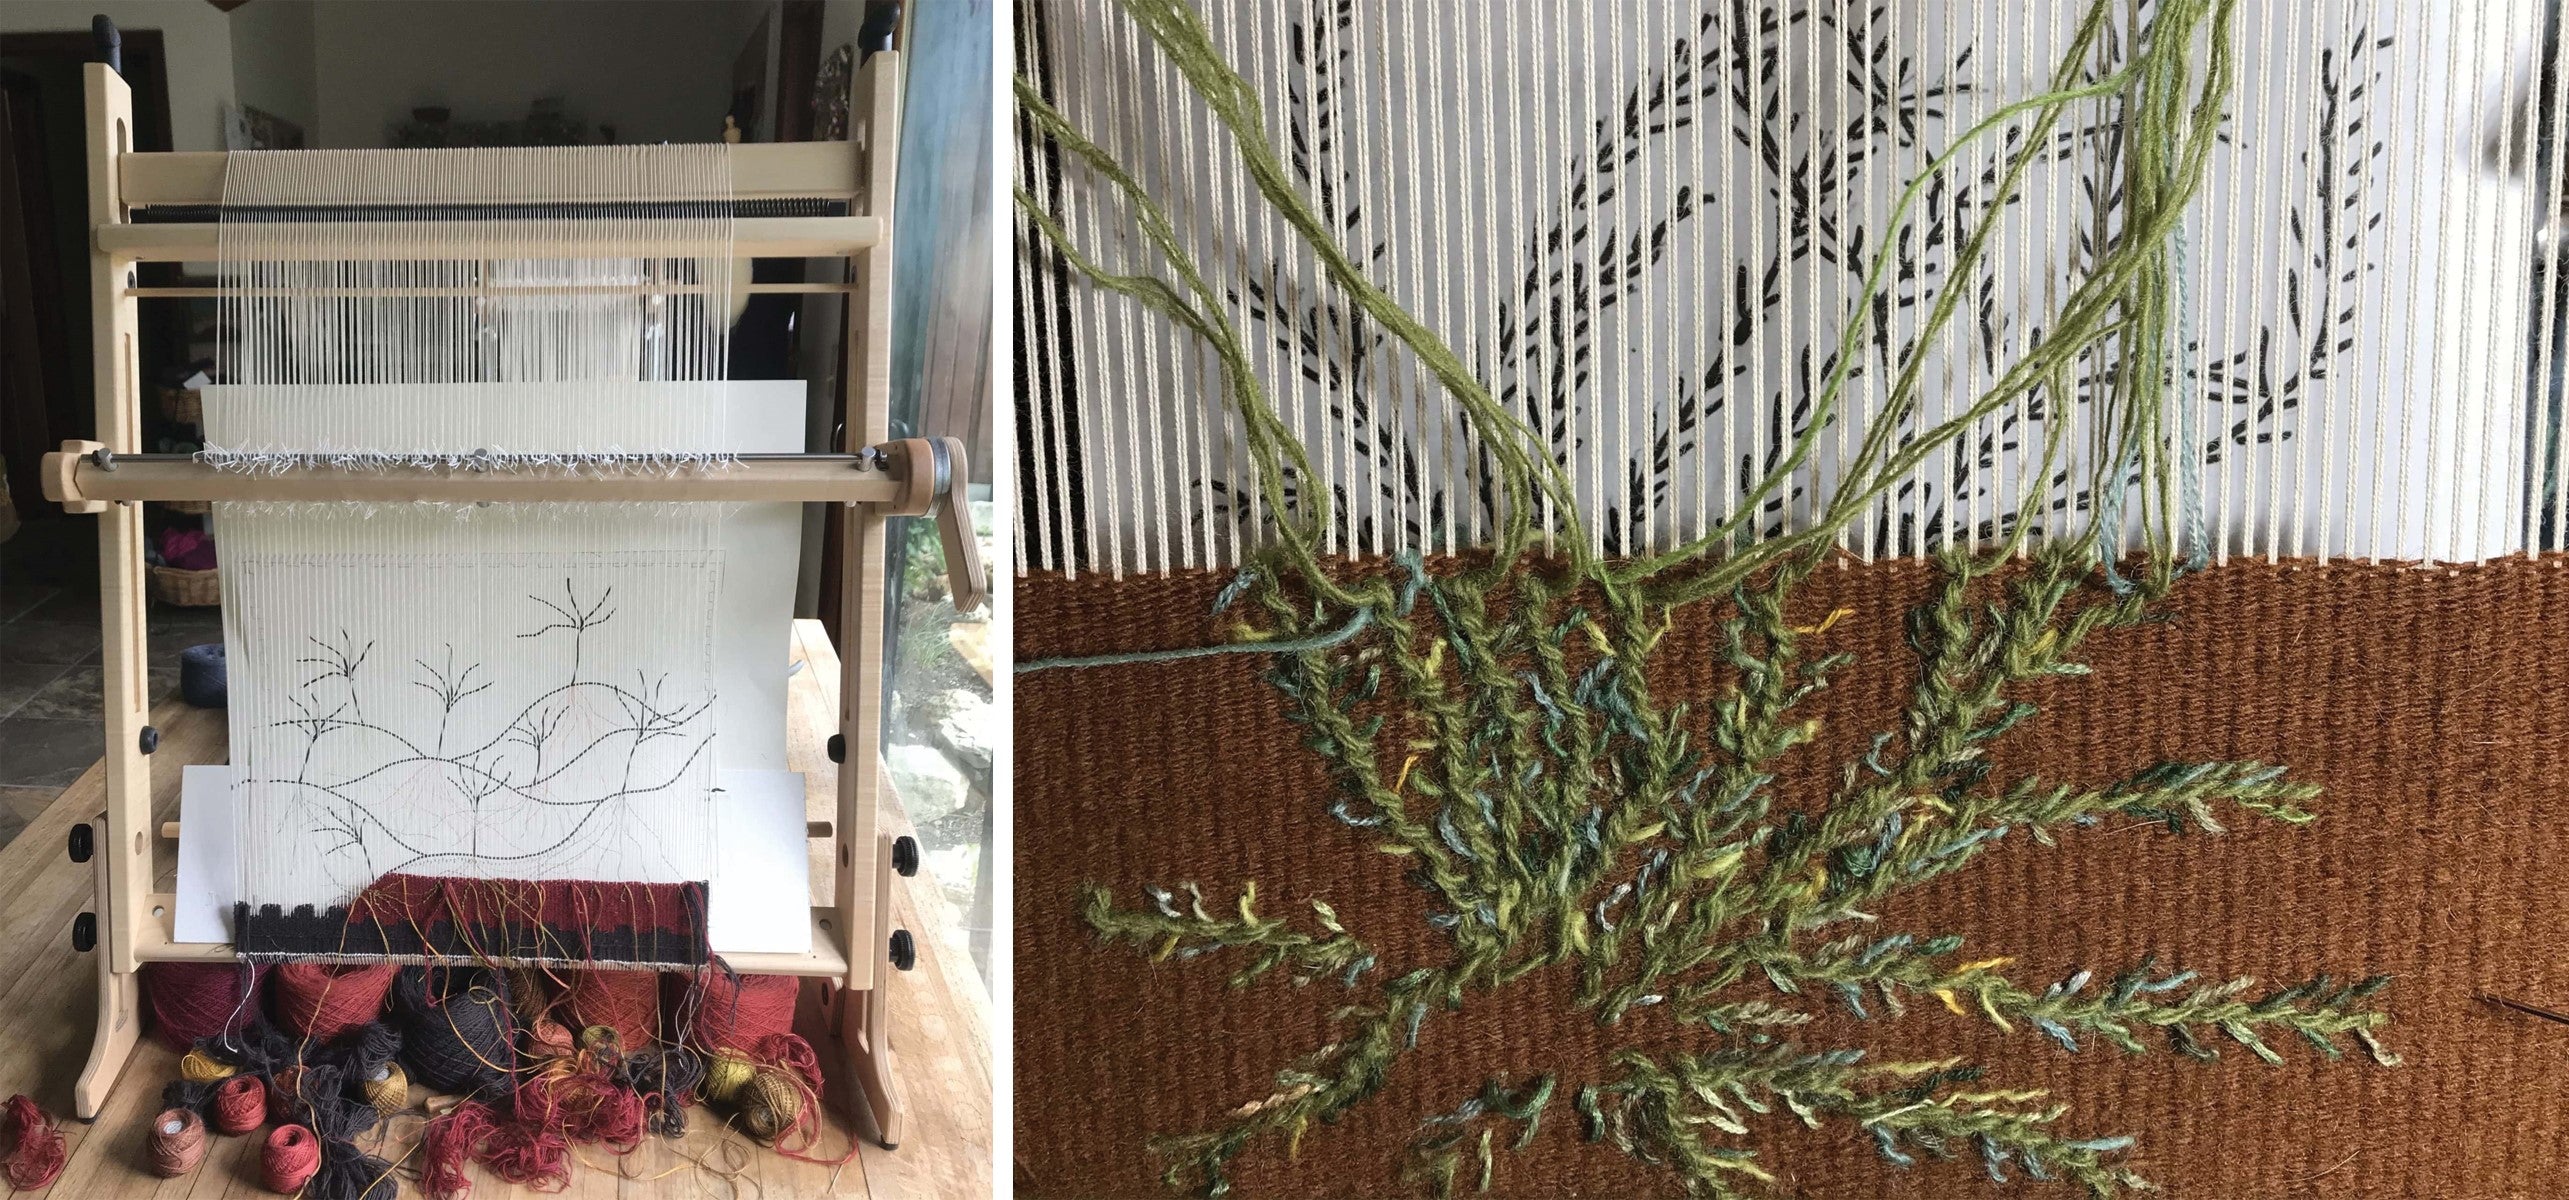 Weaving Tapestry On My New Arras